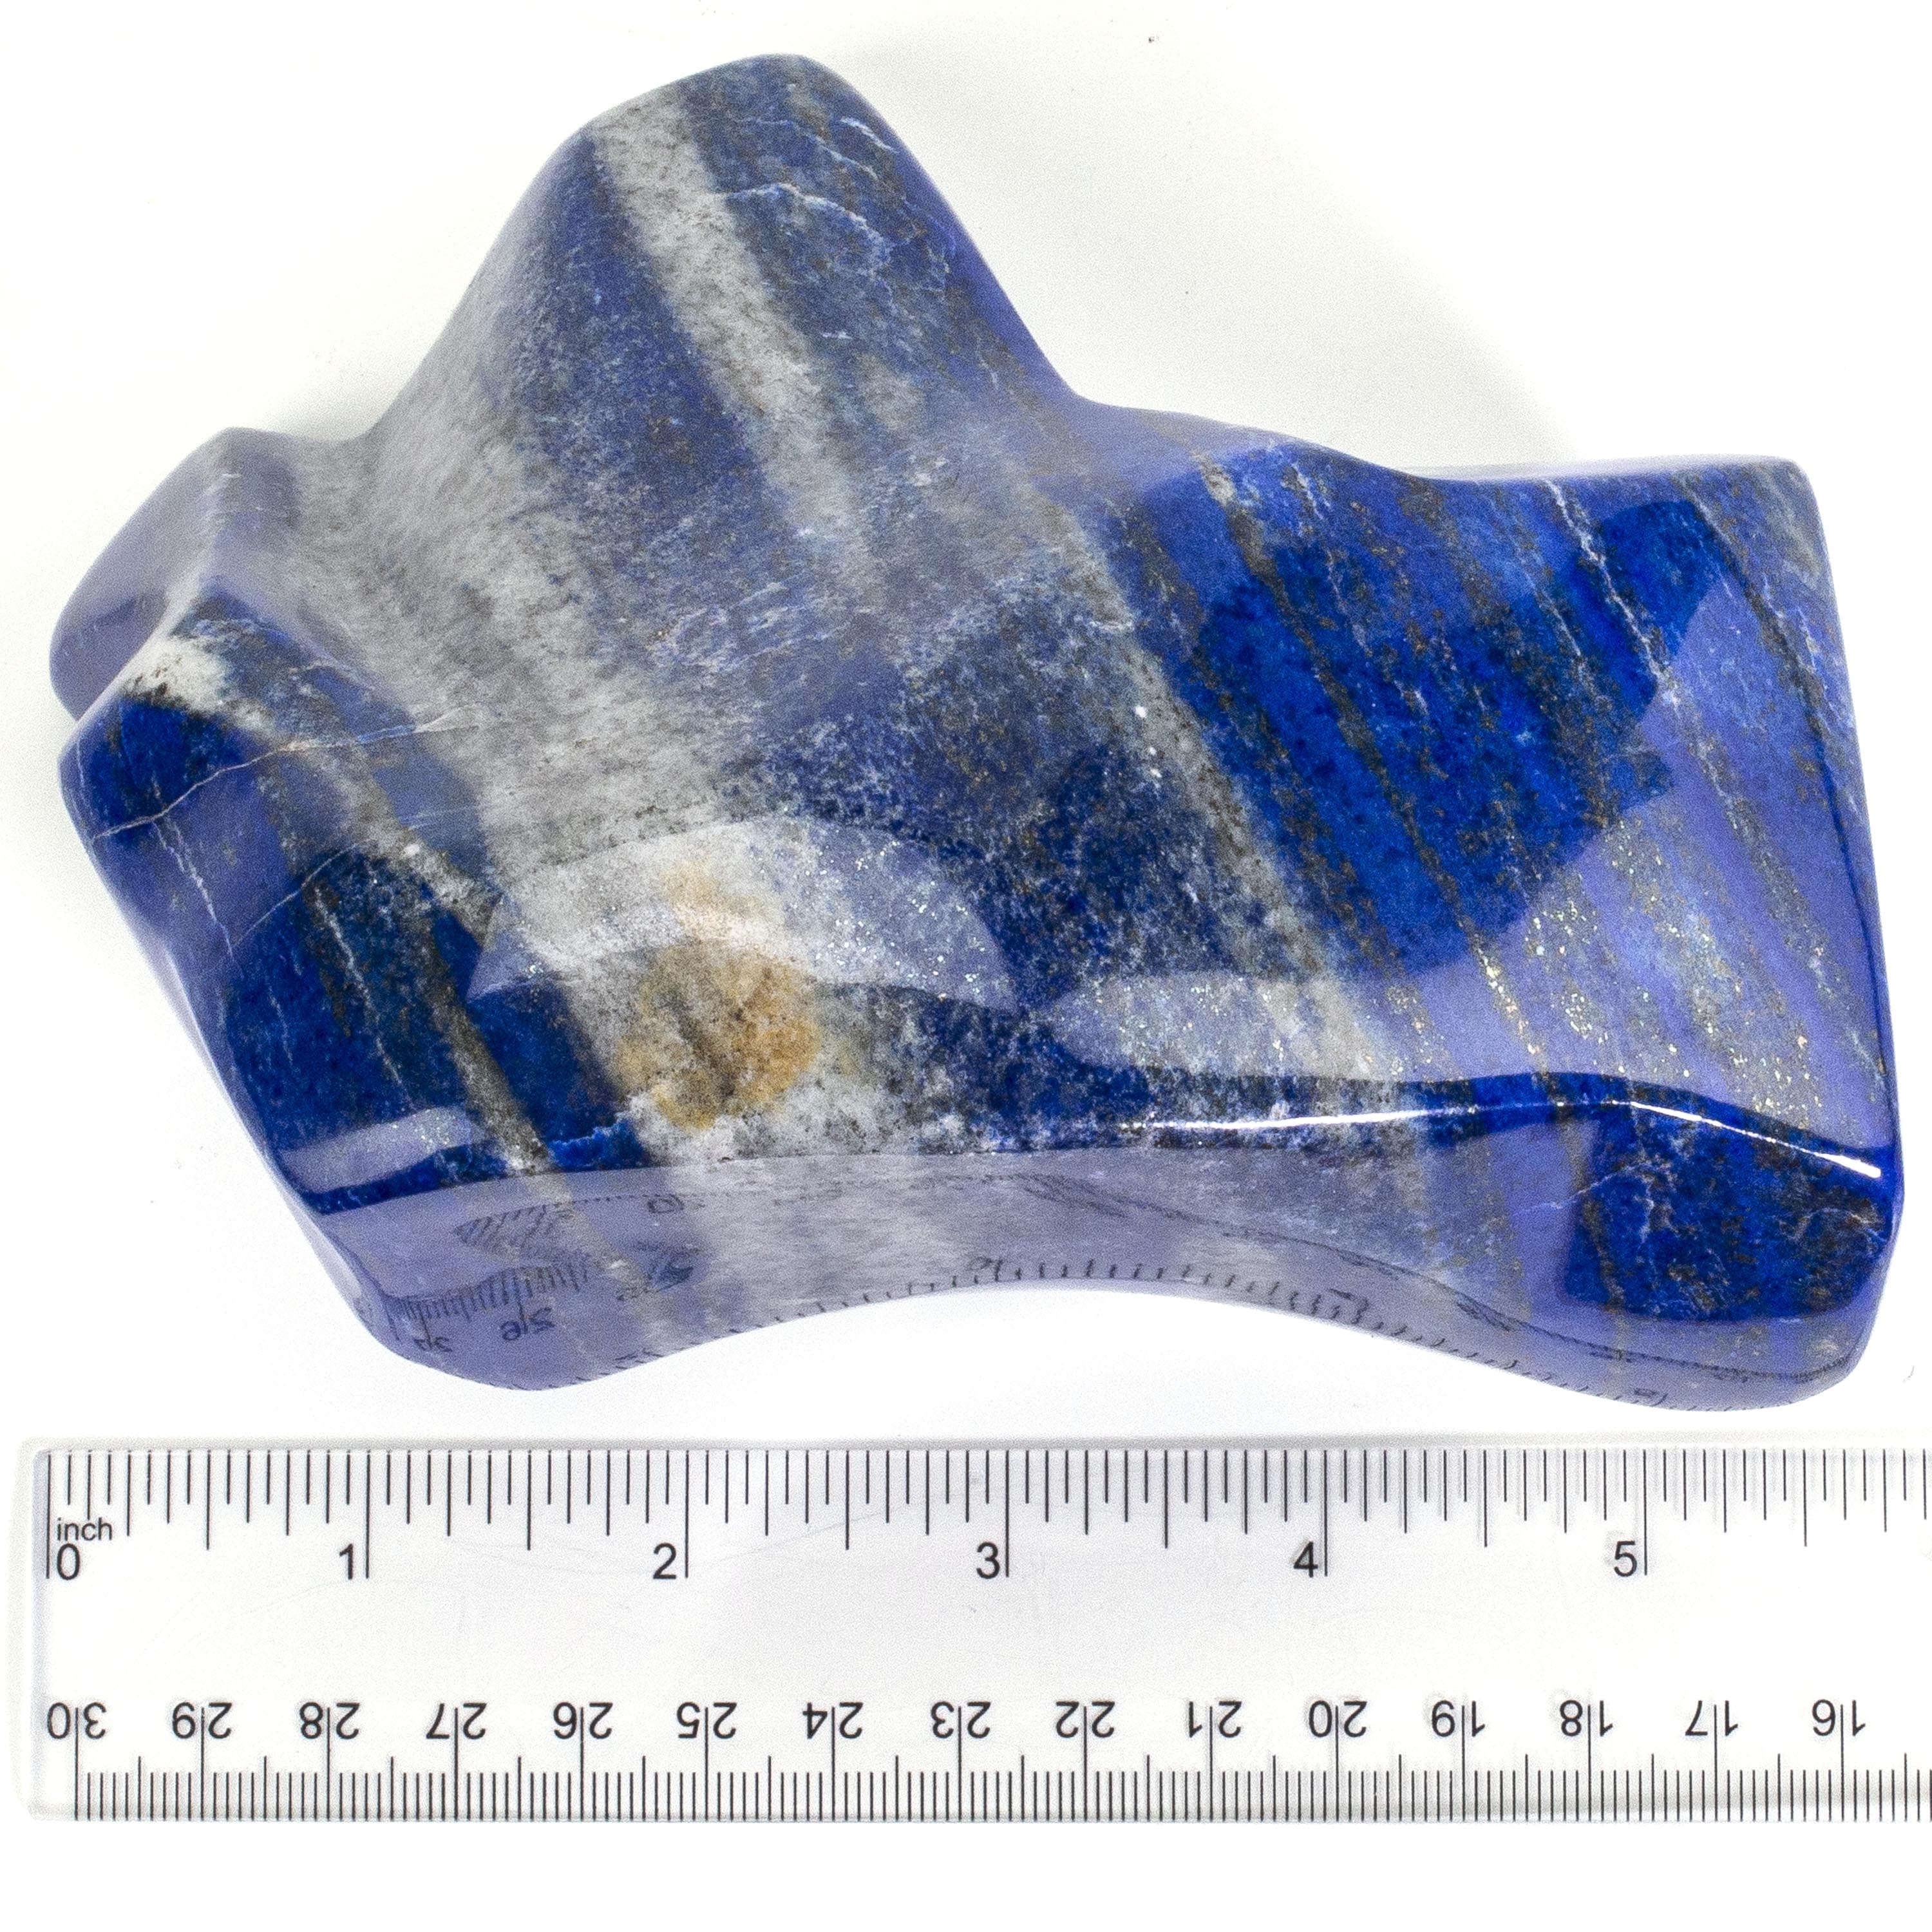 Kalifano Lapis Lapis Lazuil Freeform from Afghanistan - 1.9 kg / 4.3 lbs LP2100.001